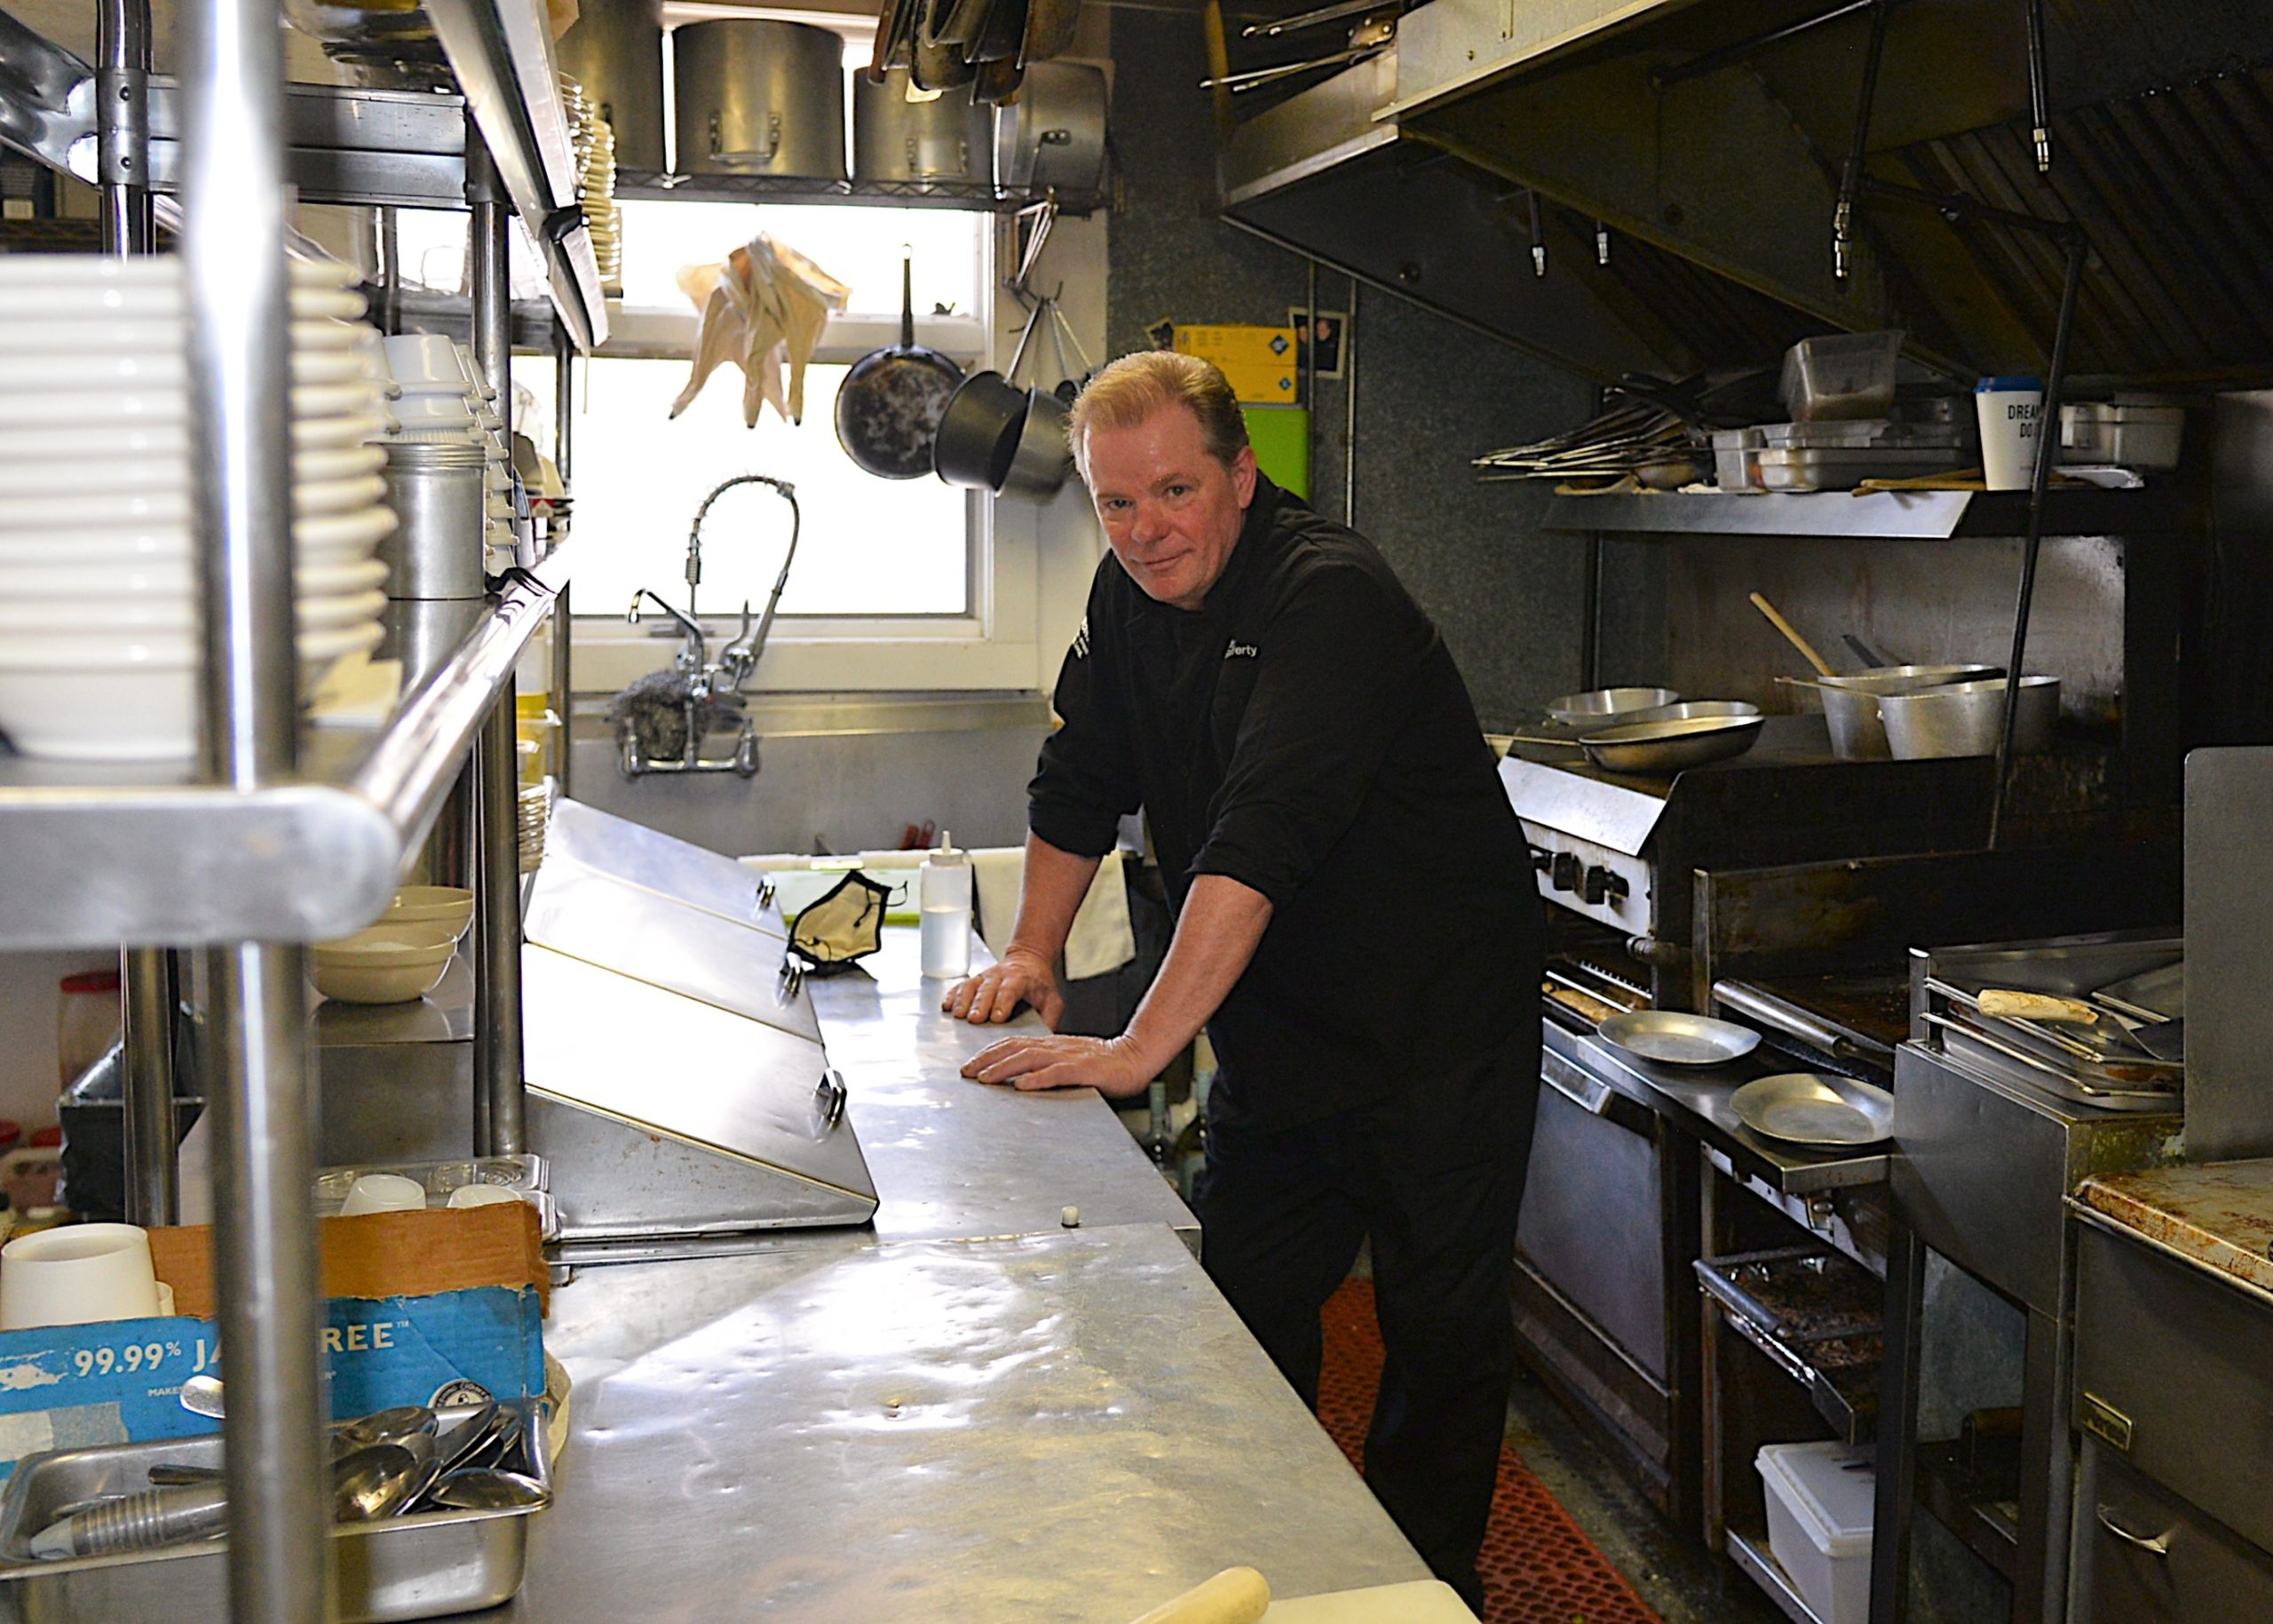 Chef Ken Rafferty of the Springs Tavern, where the owners increased kitchen staff, expanded their menu offerings and retooled the website to compensate for the increased demand for easy-access take-out dinners over the winter.